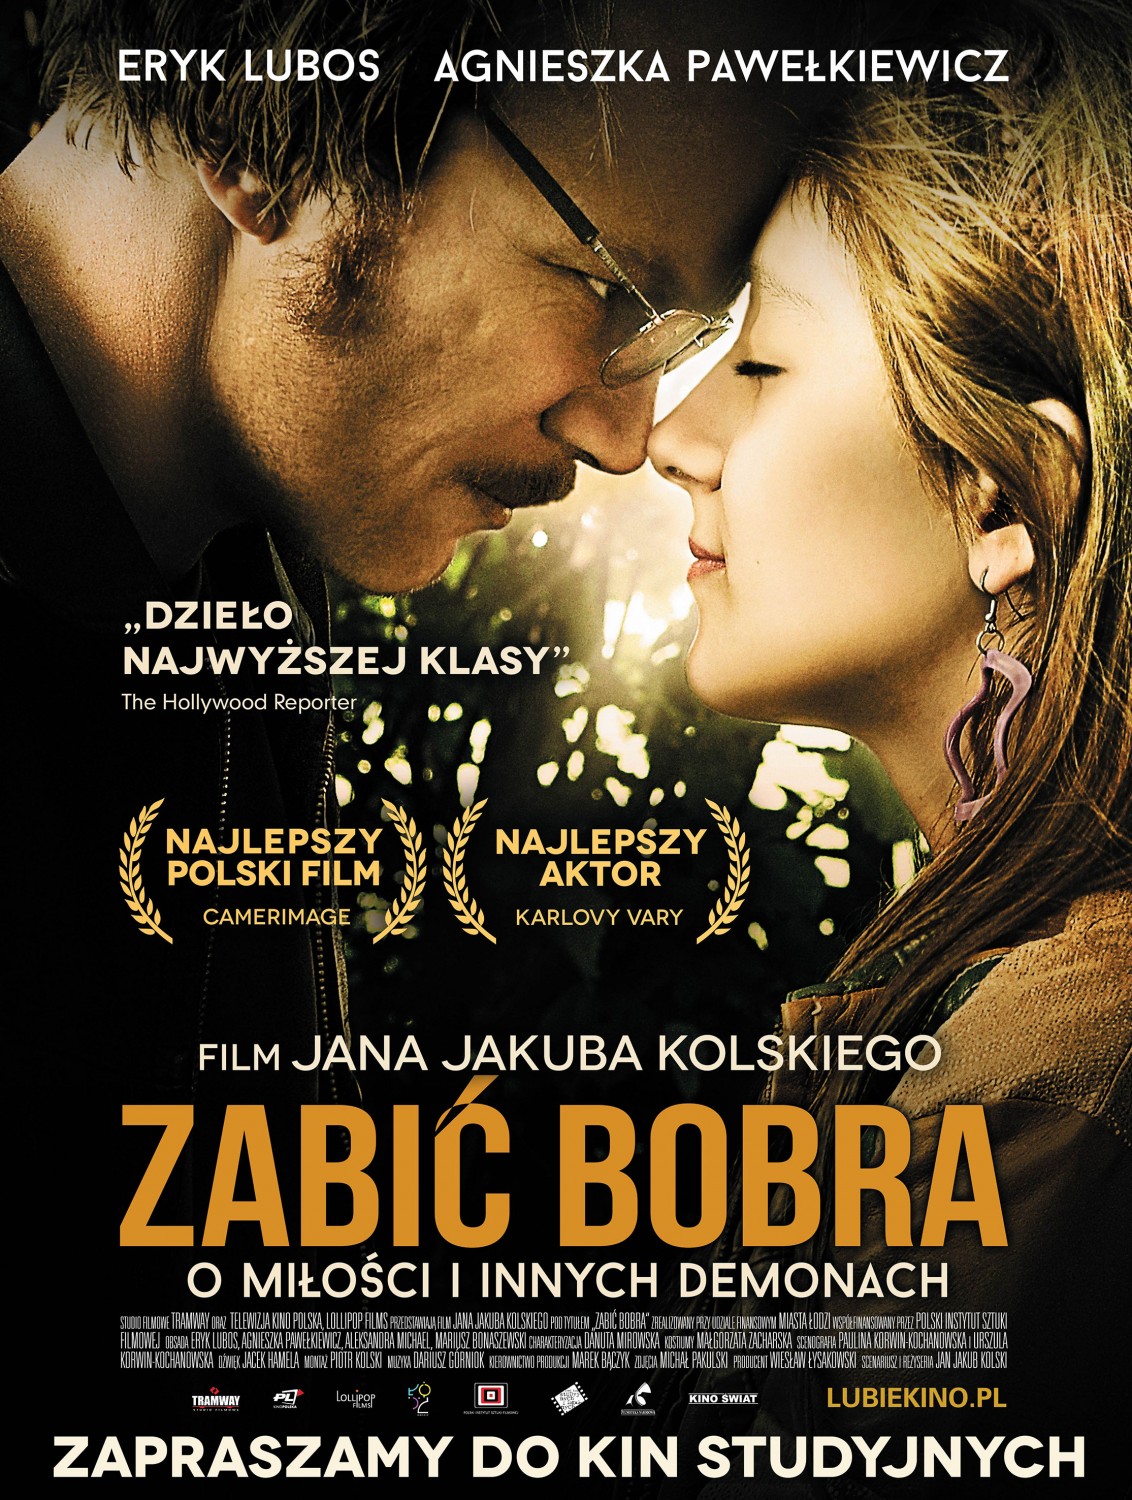 Extra Large Movie Poster Image for Zabic bobra (#2 of 2)